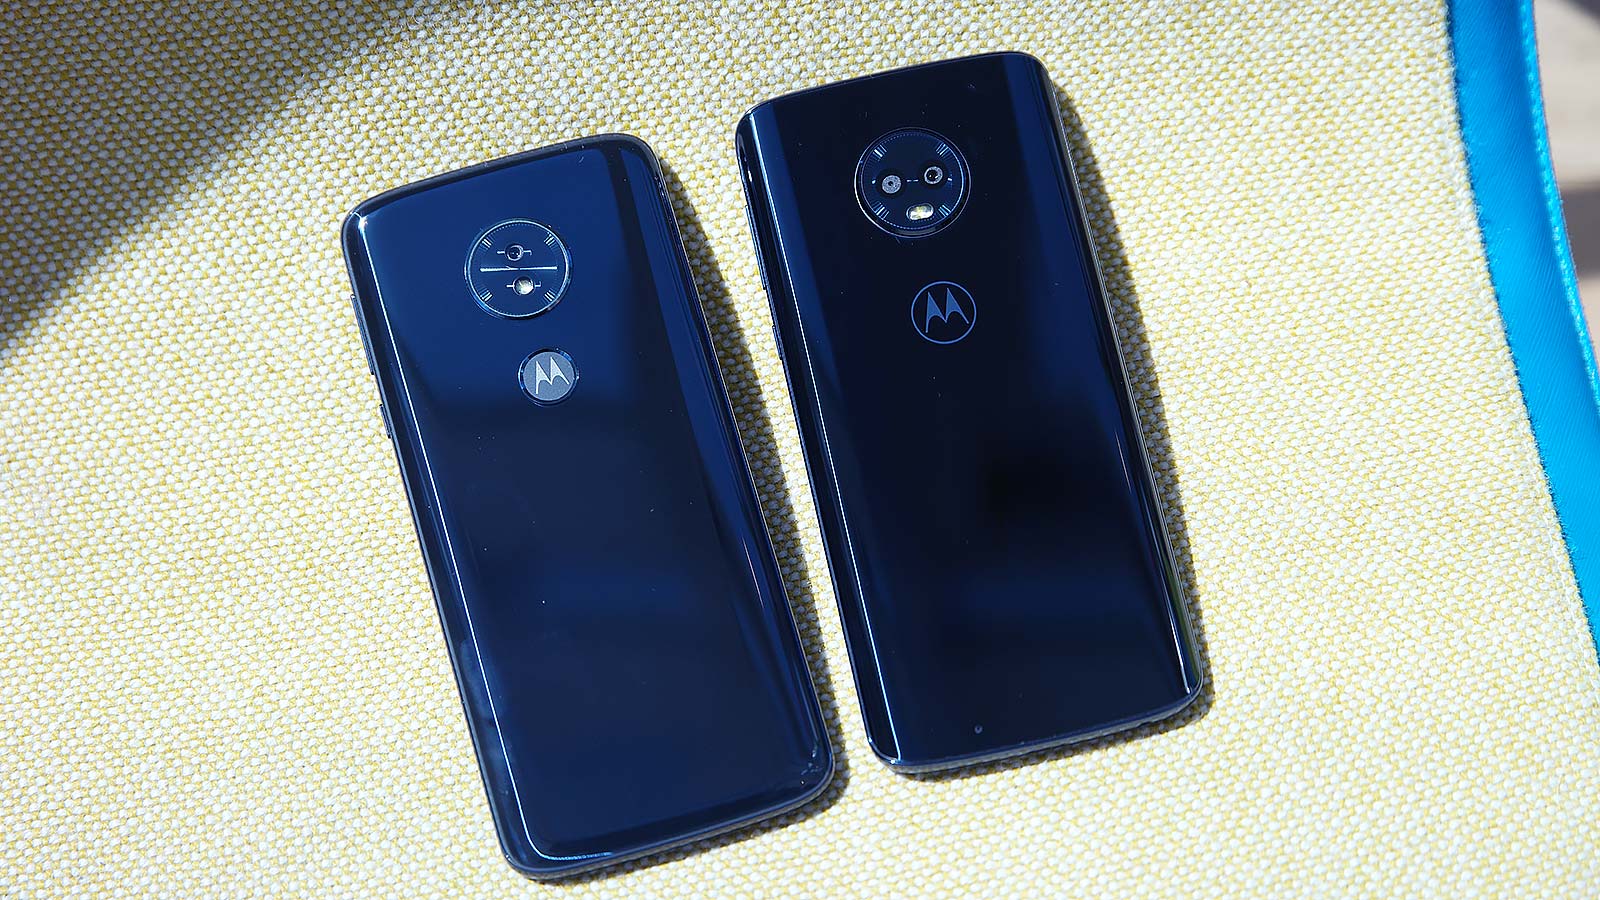 Moto’s Great Cheap Phones Are Back, Now With A Face ID Knockoff